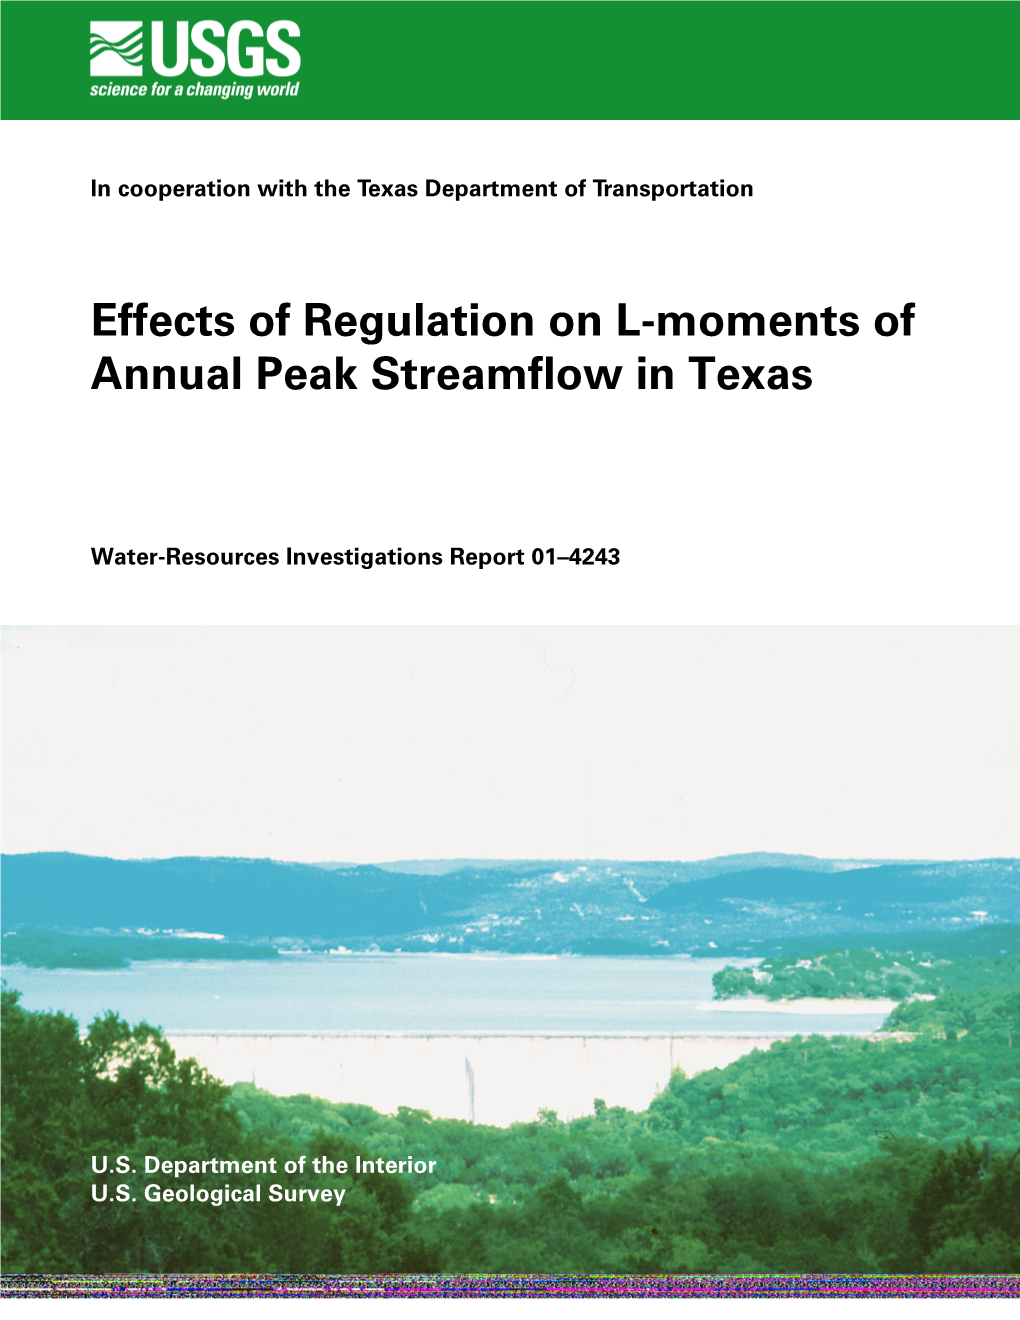 Effects of Regulation on L-Moments of Annual Peak Streamflow in Texas